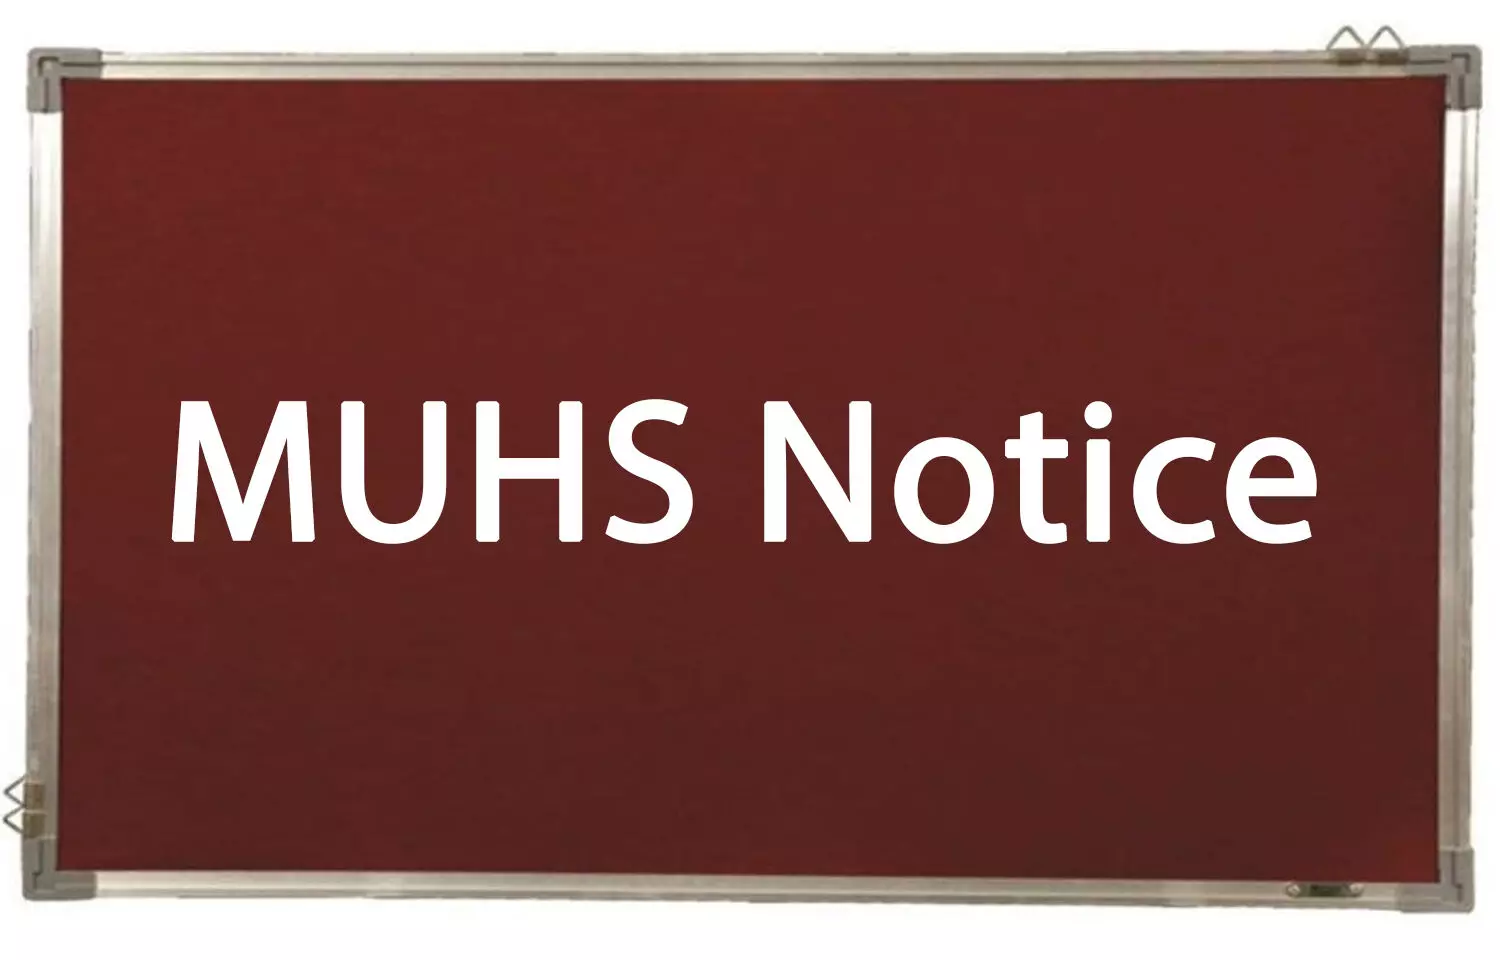 MUHS 20th Convocation likely to be held in January 2021 via online mode, APPLY by 31st December 2020